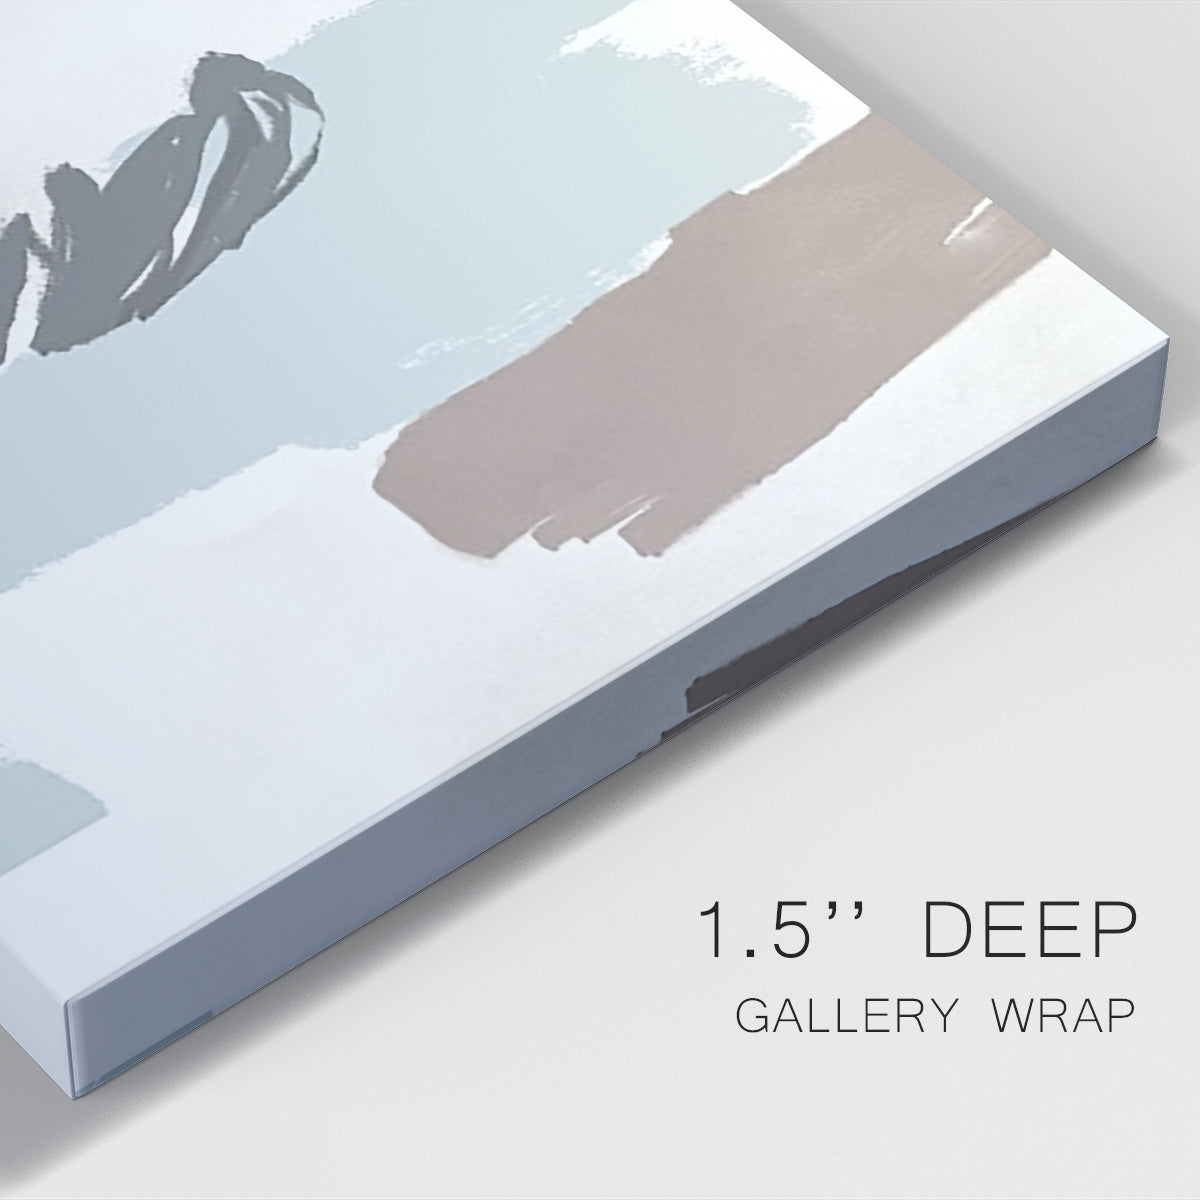 Neutral Wash II Premium Gallery Wrapped Canvas - Ready to Hang